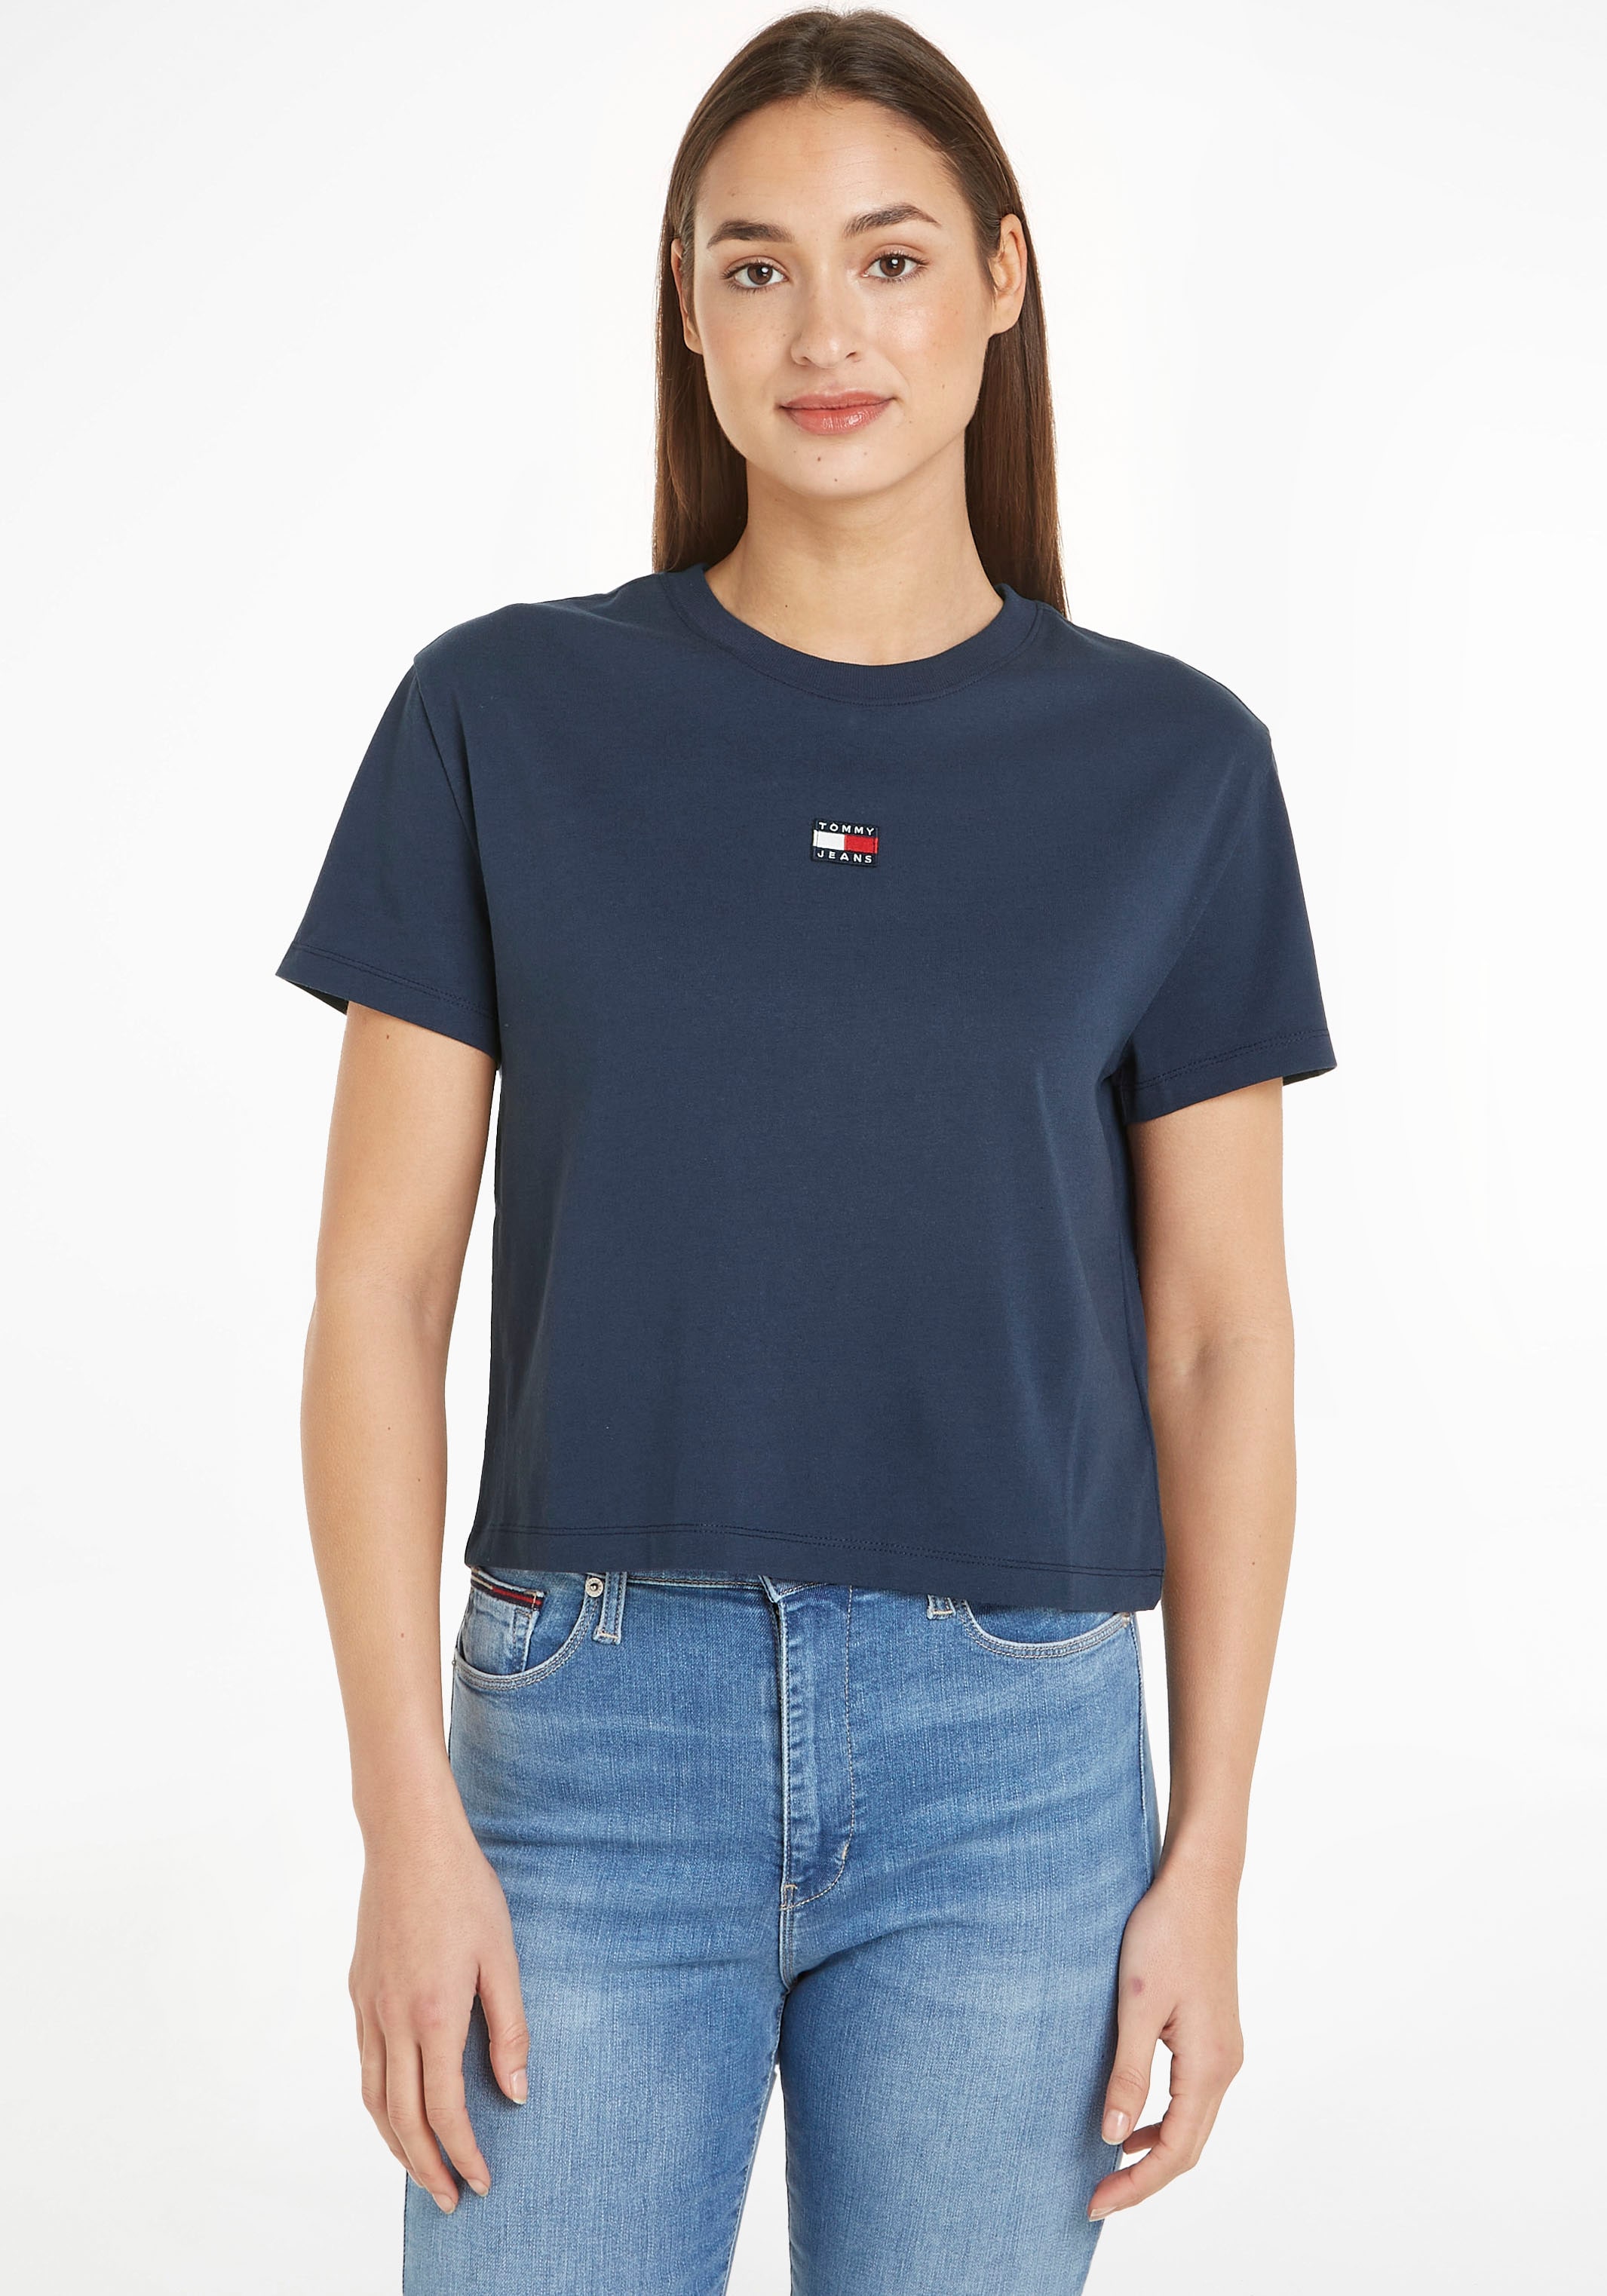 T-Shirt Tommy Logostickerei mit Jeans CLS Jeans XS am Online »TJW BADGE Brustkorb im Shop TEE«, OTTO Tommy